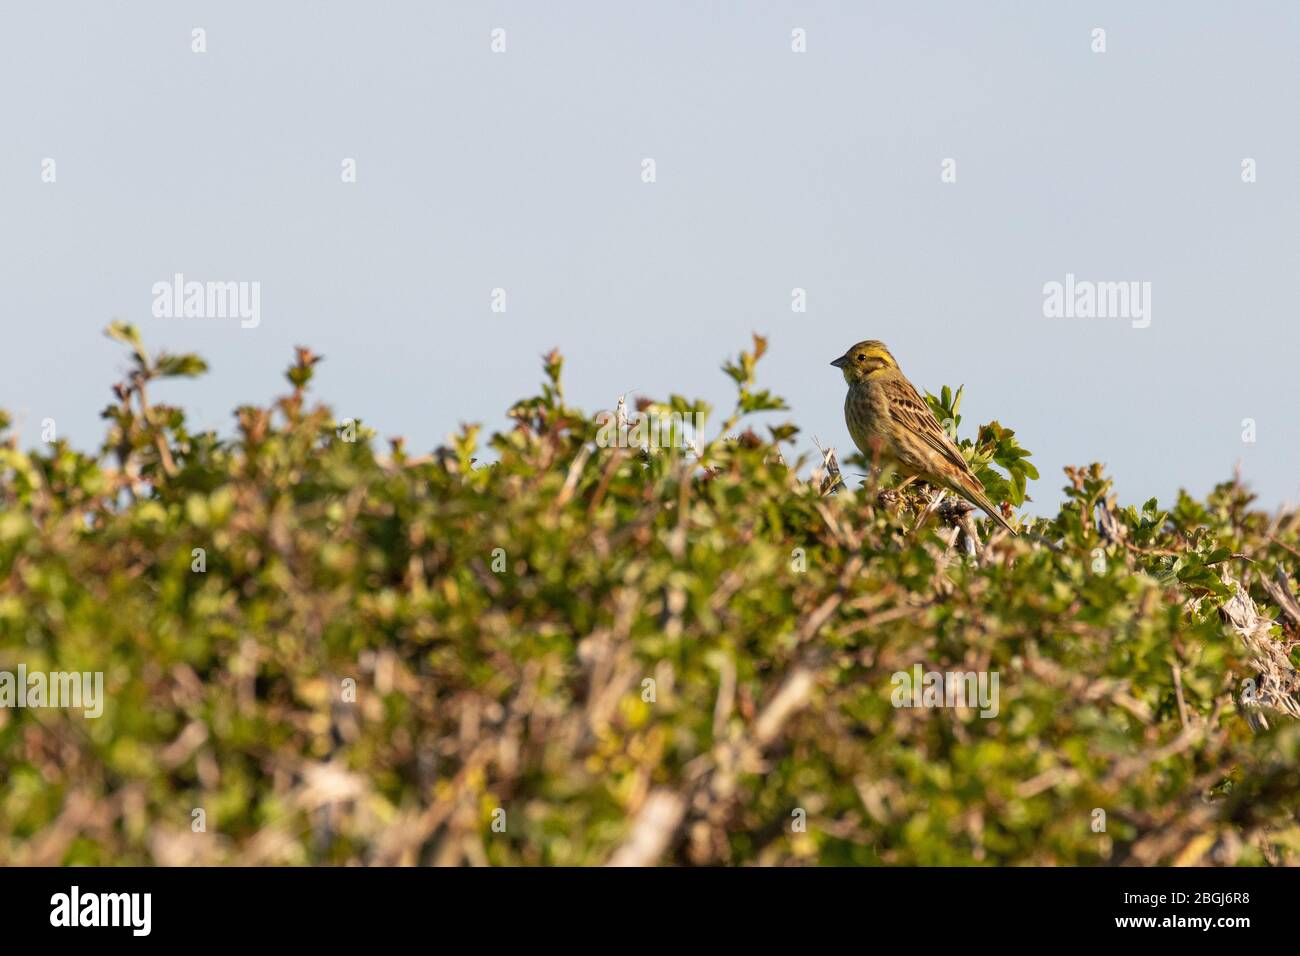 A bird perched in the top of a hedgerow against a blue sky Stock Photo